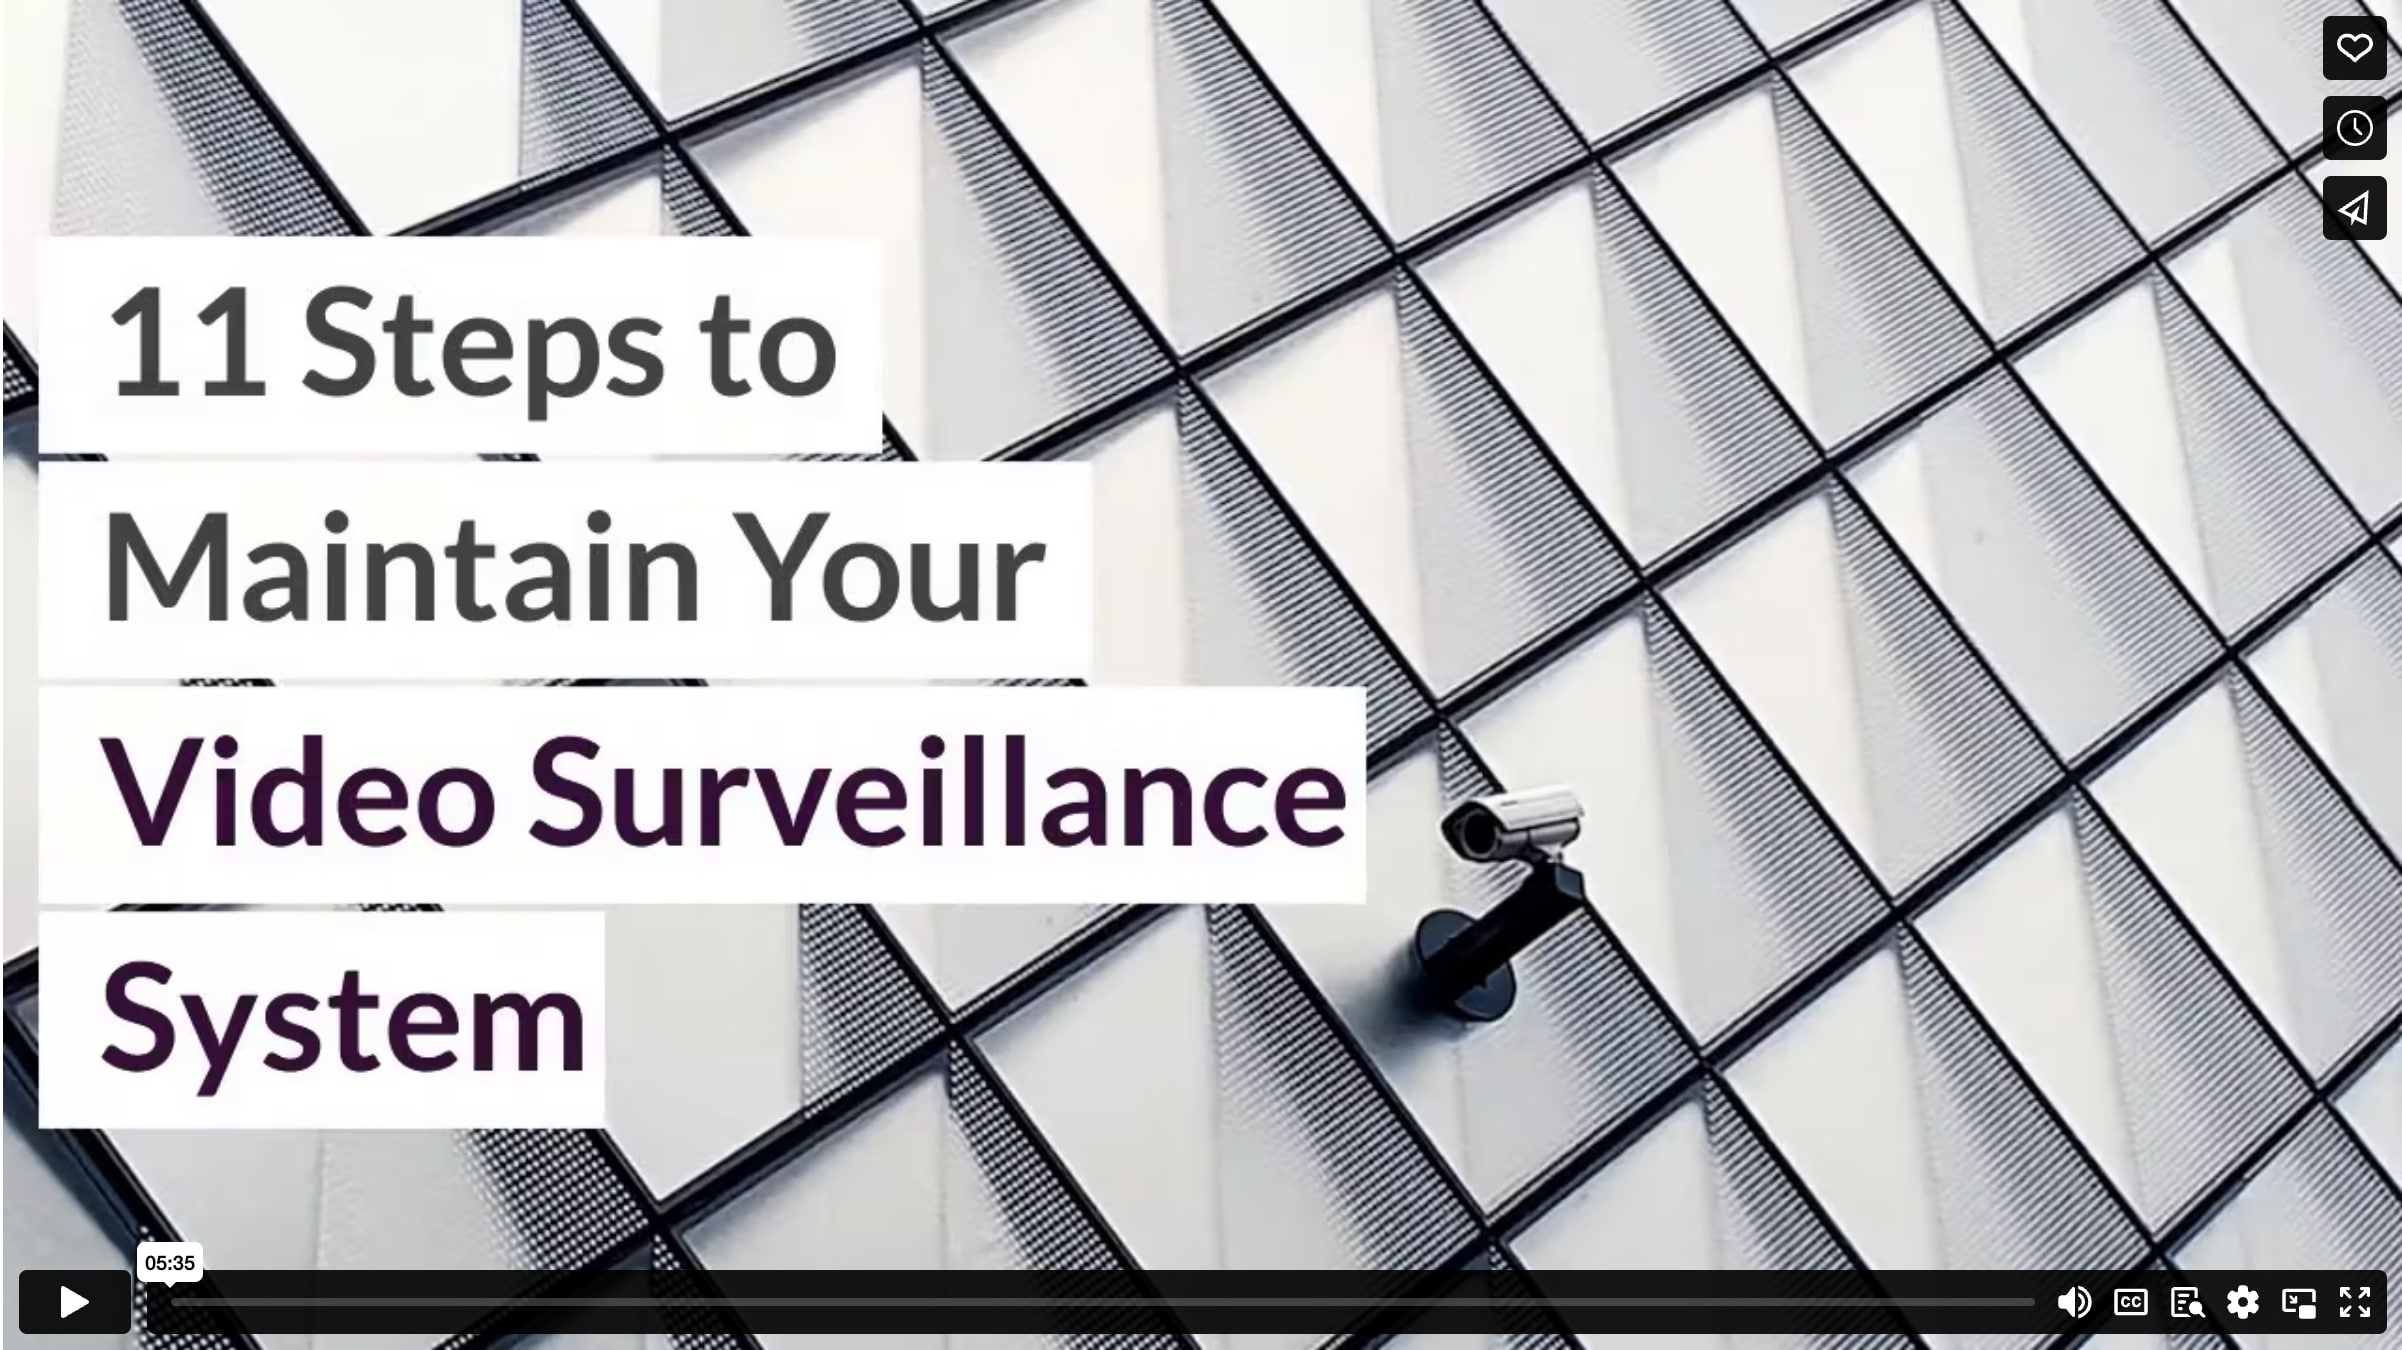 11 Steps to Maintain Your Video Surveillance System